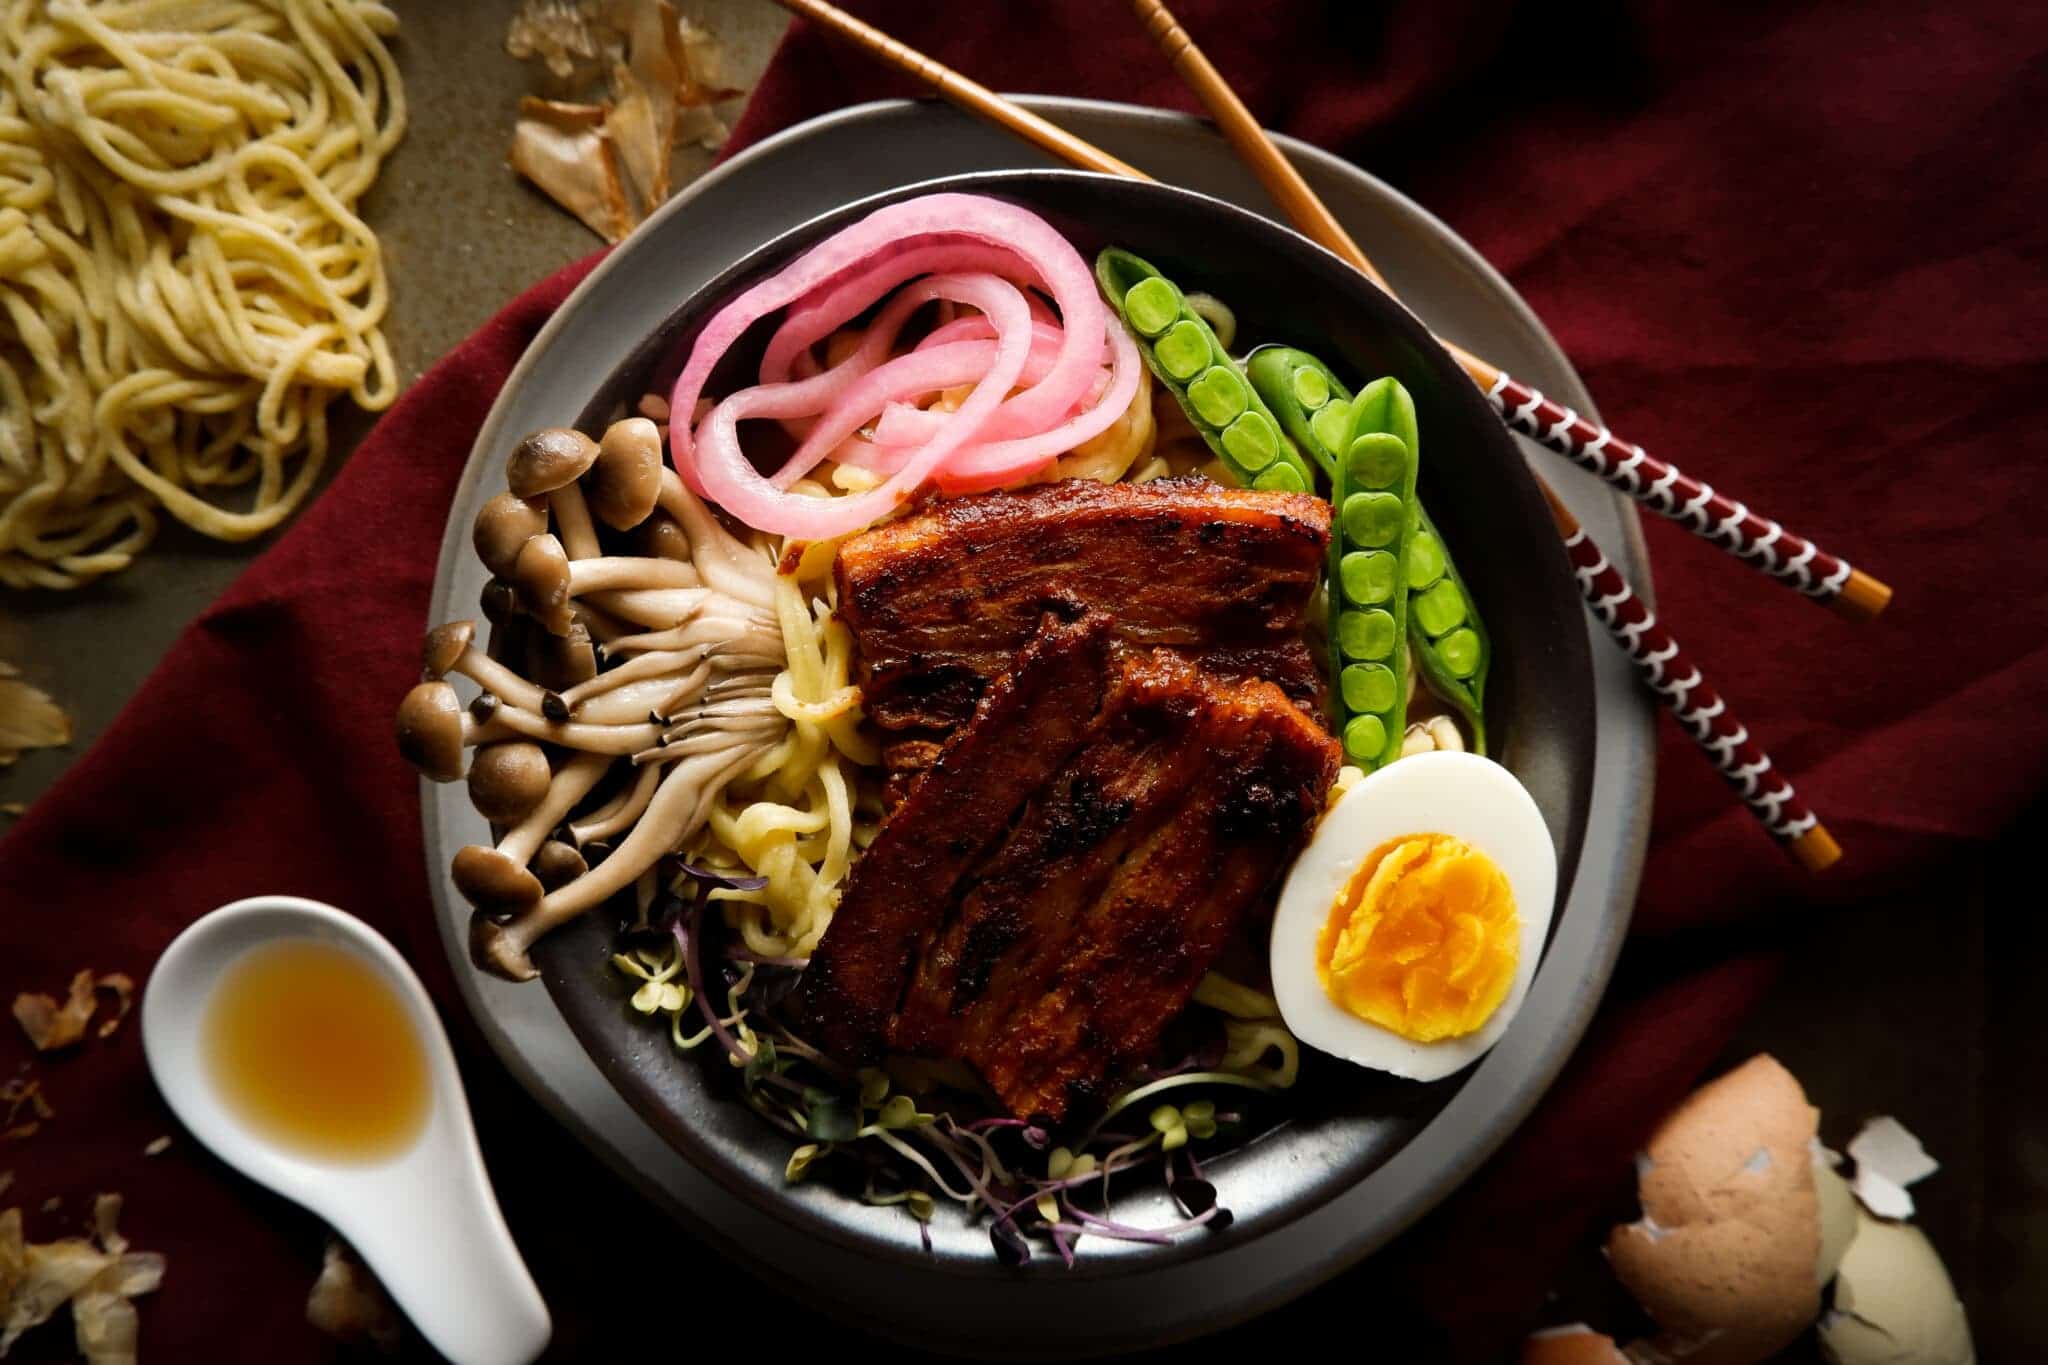 A bowl of Asian noodle soup with pork belly and vegetables.